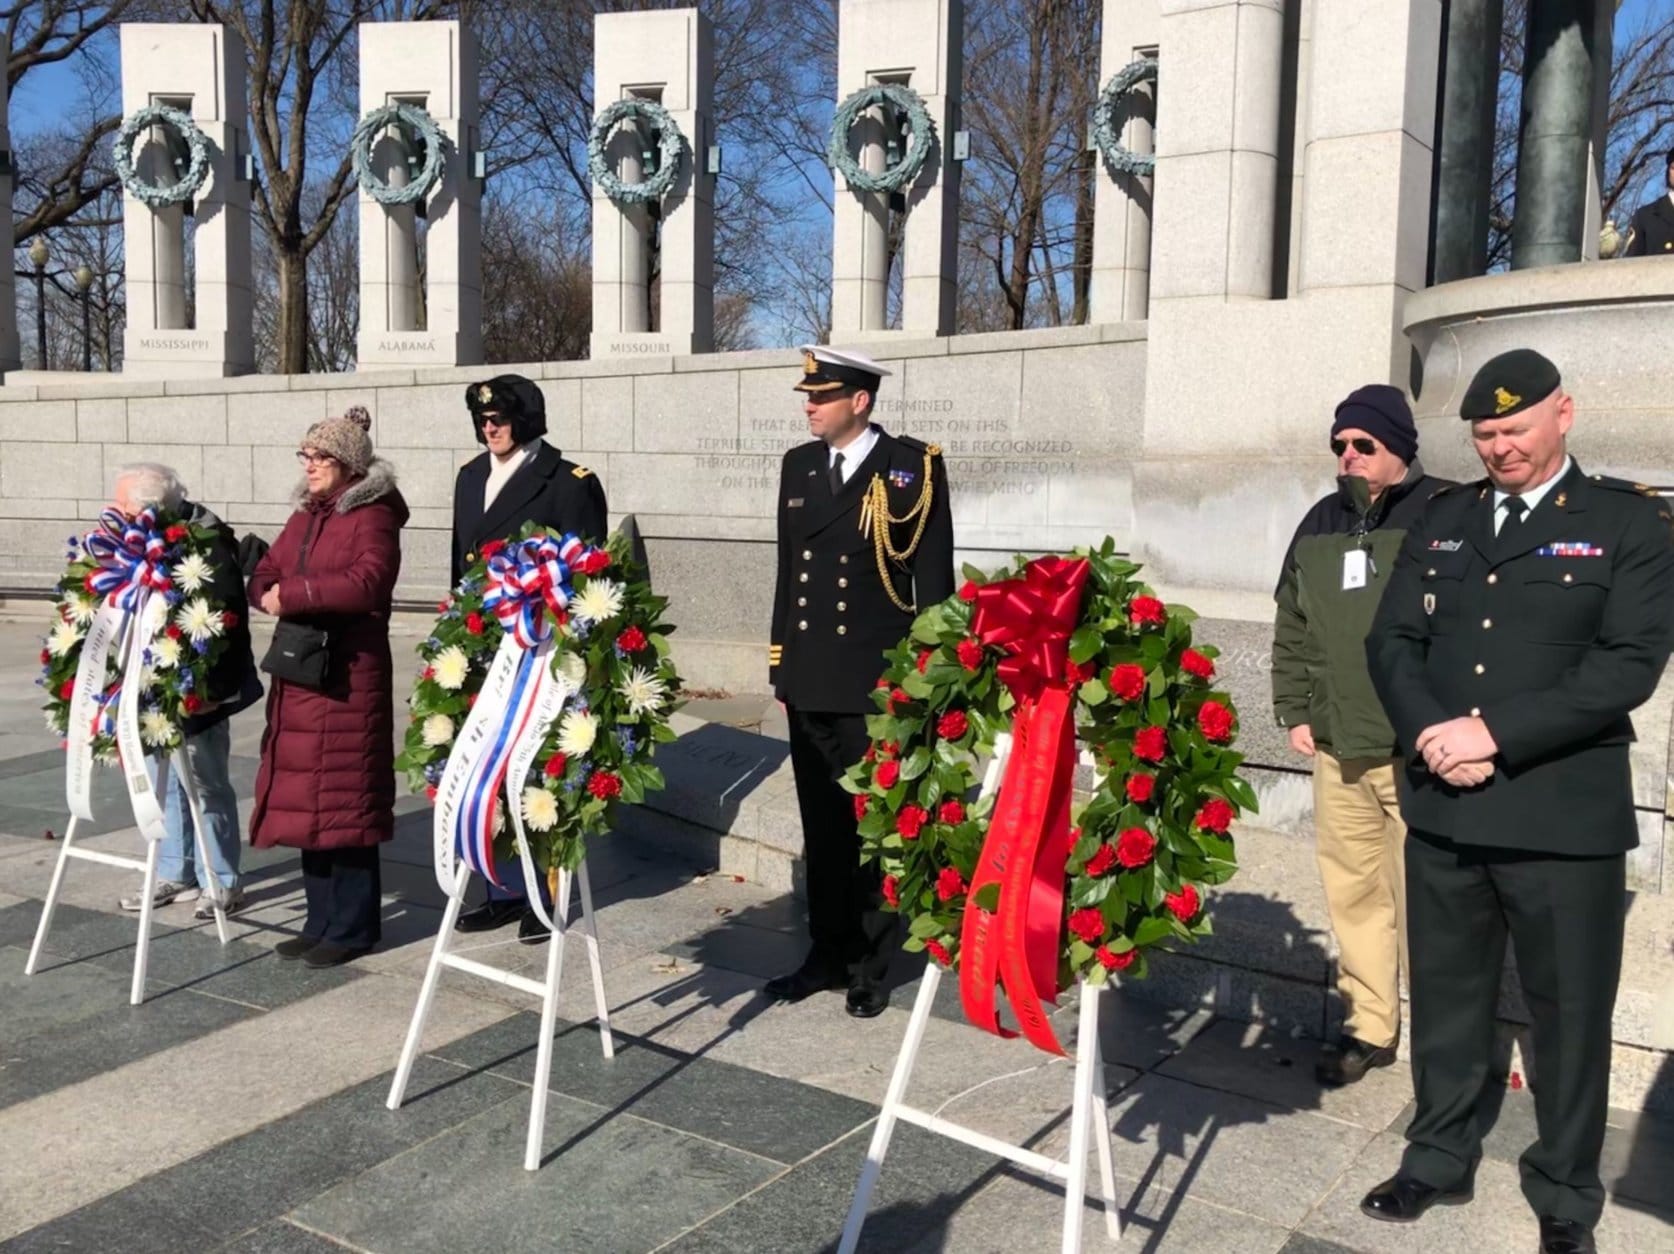 Helping lay the wreaths at the Tuesday ceremony were British and Canadian military dignitaries. From left: Chaplain Lt. Col. Todd Wolf; Cmdr. Richard McHugh; and Maj. Jeff Pederson. (WTOP/Kristi King)